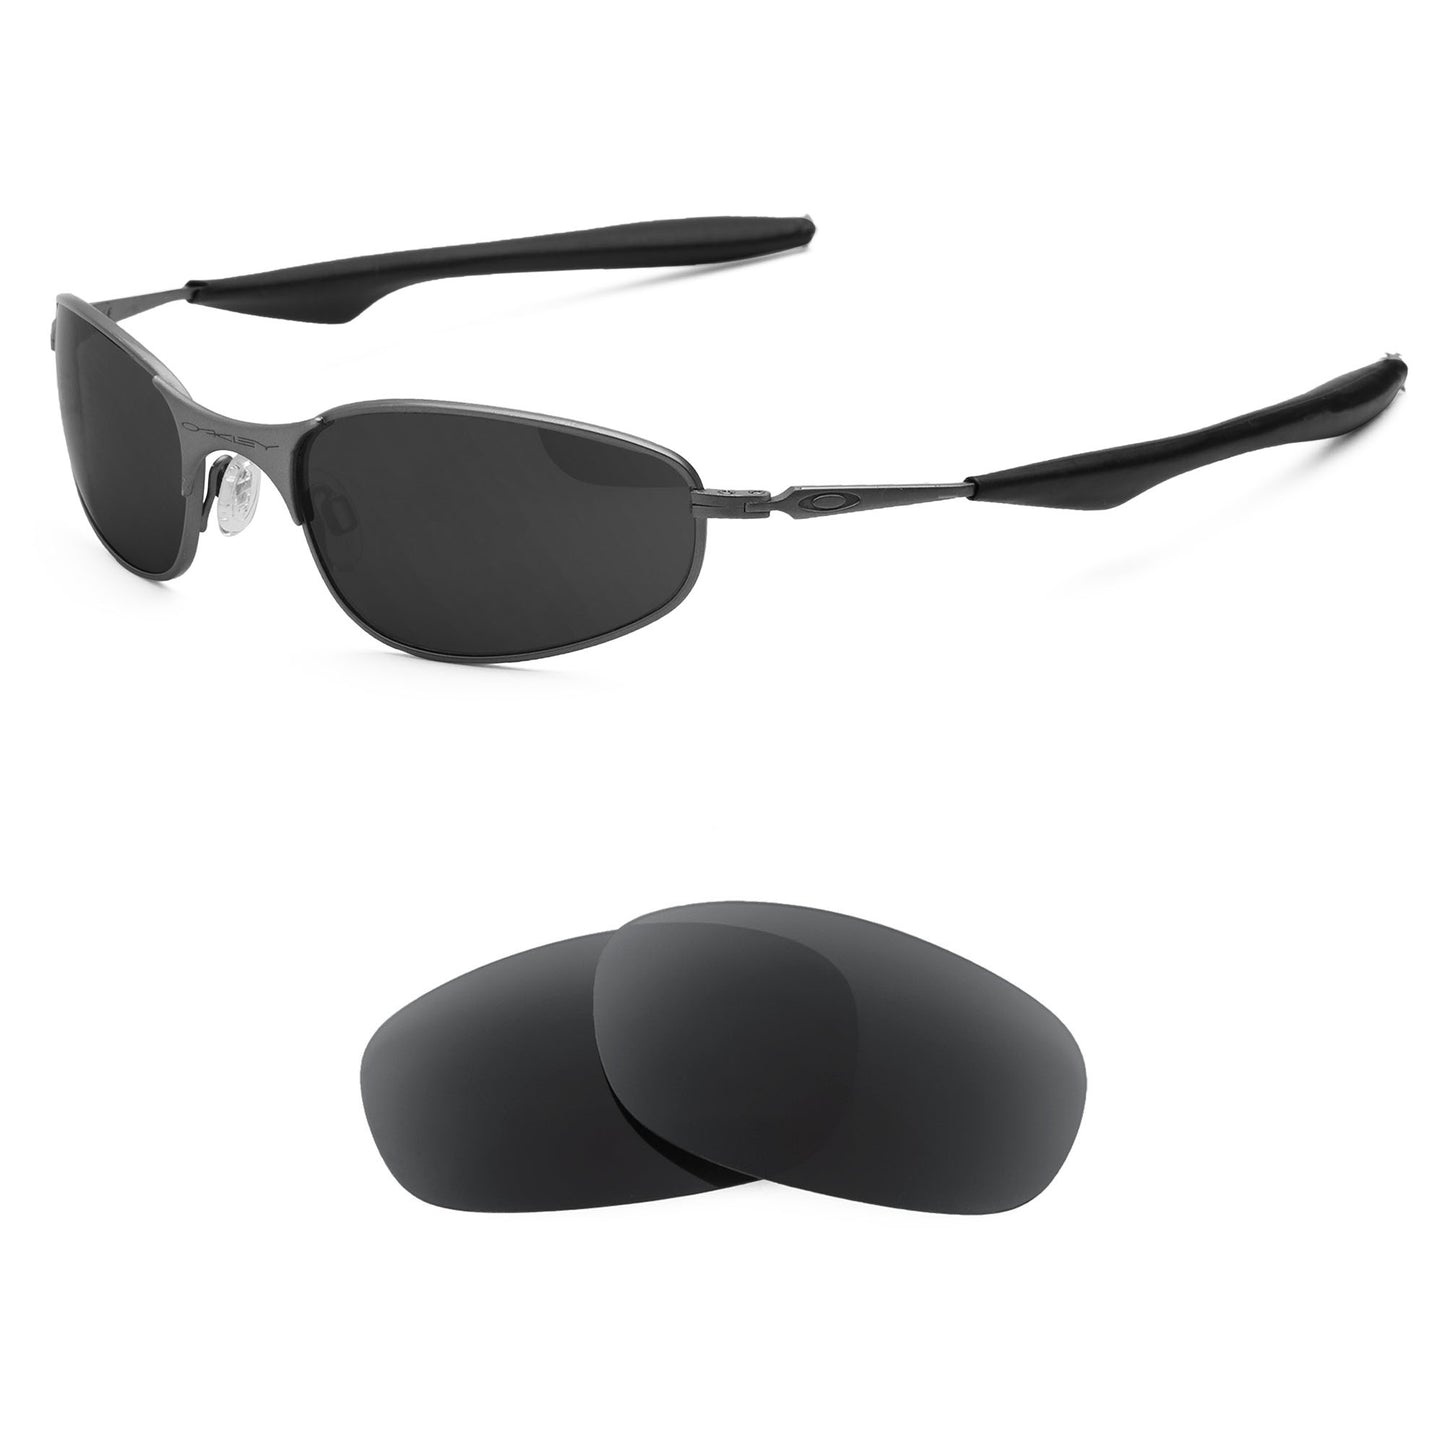 Oakley A Wire sunglasses with replacement lenses